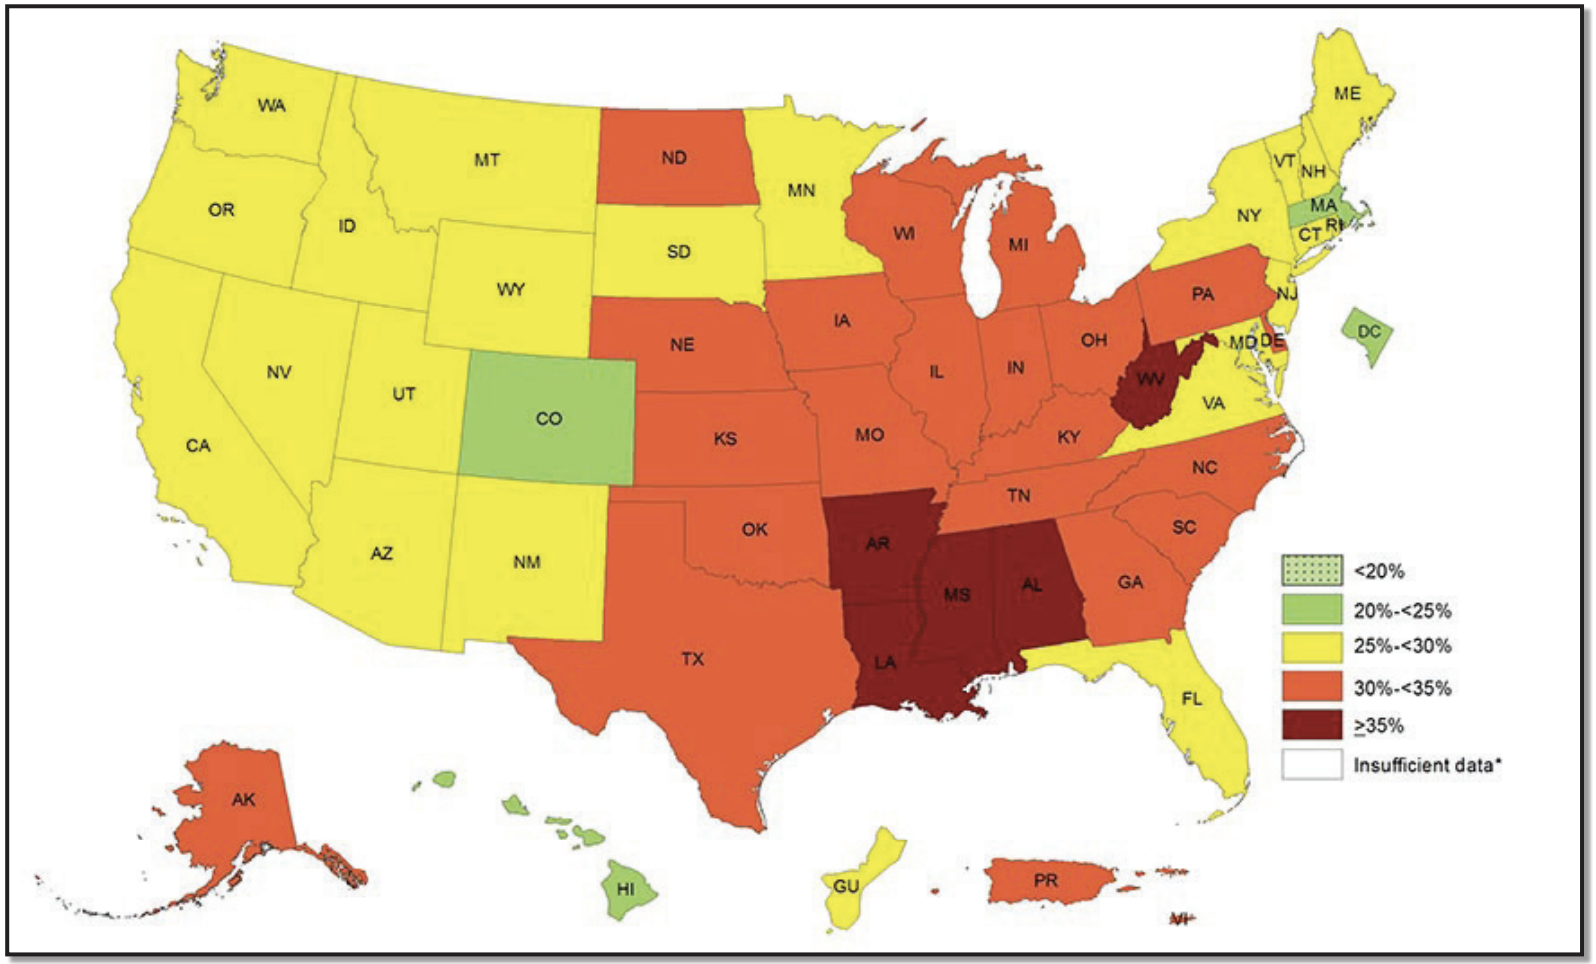 Obesity Rate ranges in the united states, by state